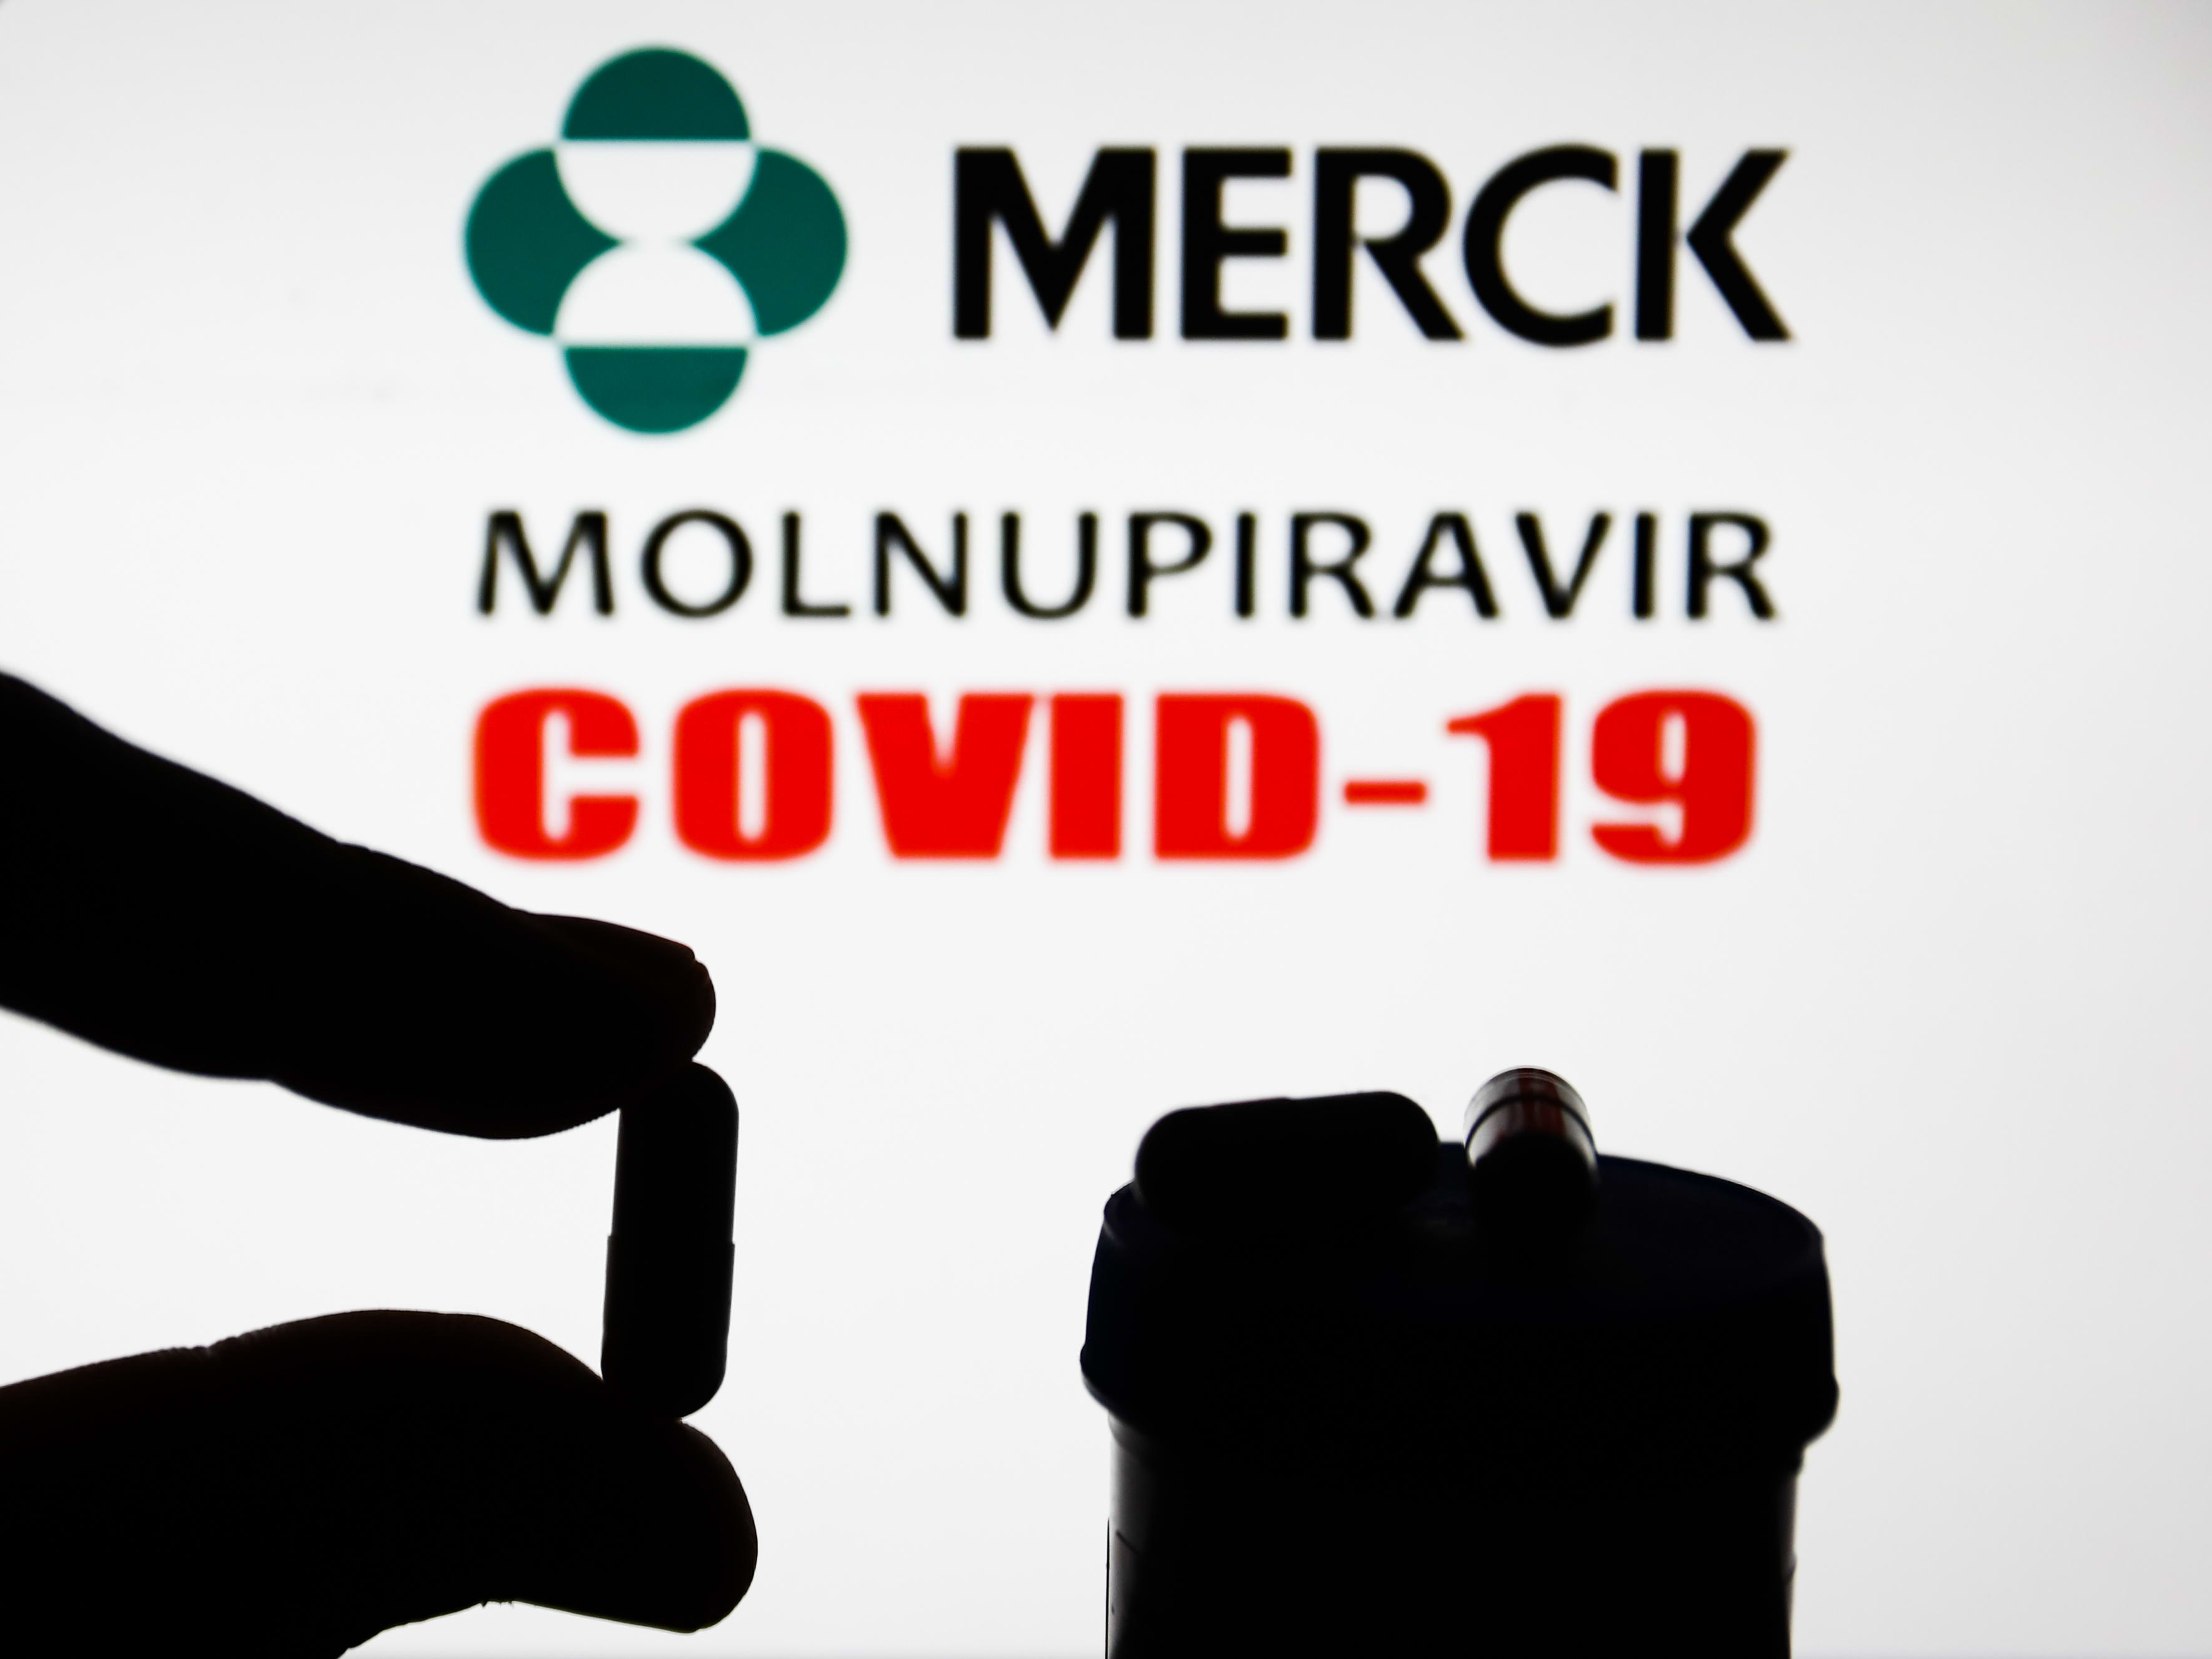 FDA advisory panel narrowly endorses Merck's oral Covid treatment pill, despite reduced efficacy and safety questions